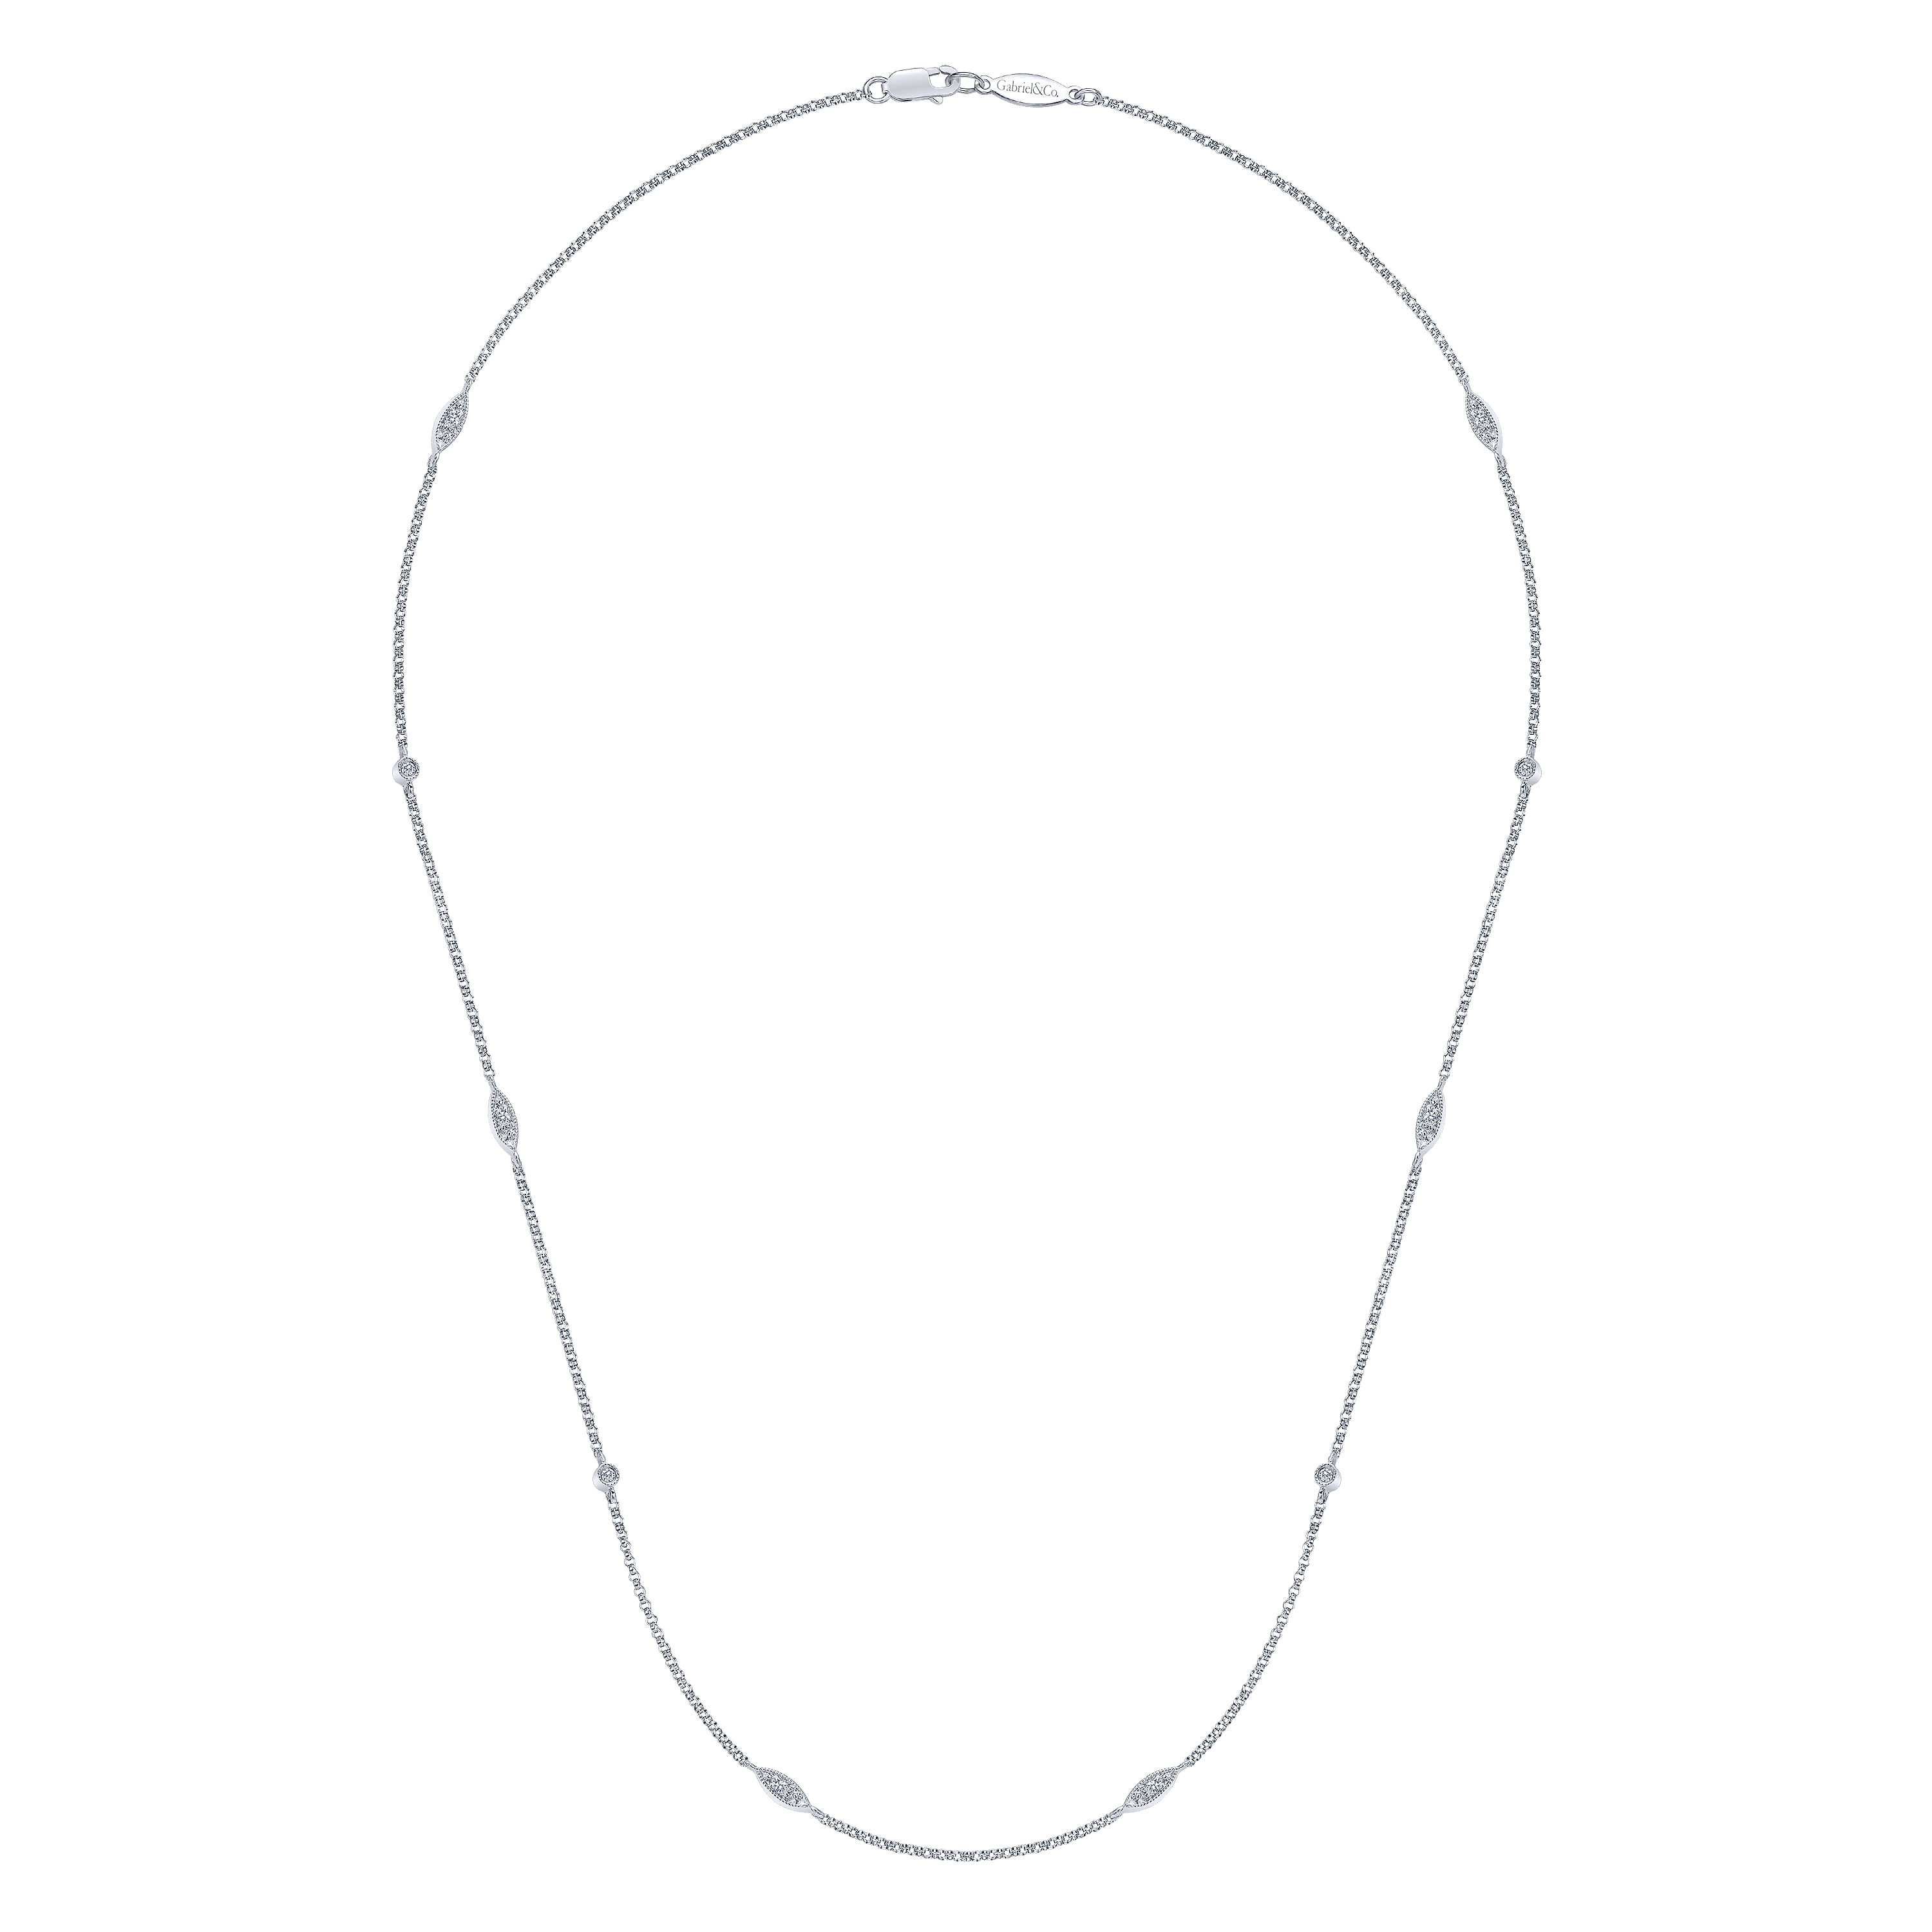 14K White Gold Round and Marquise Station Diamond Necklace